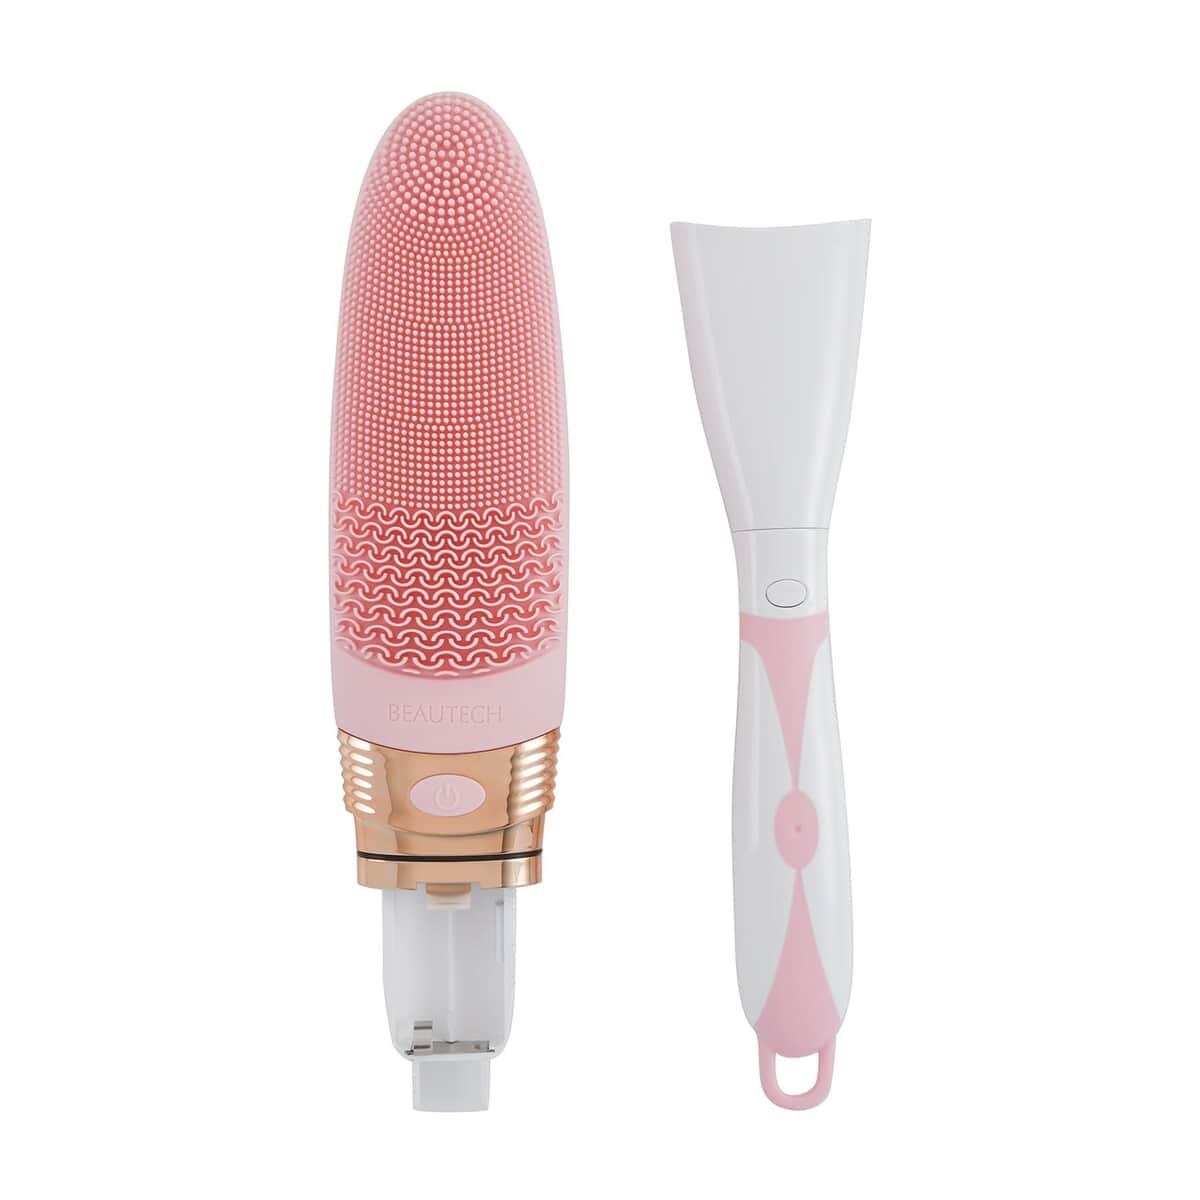 Electric Vibration Long Handle Silicone Bath Brush- Pink (16.9"x2.55"x1.57") (2AA Battery Not Incuded) image number 0